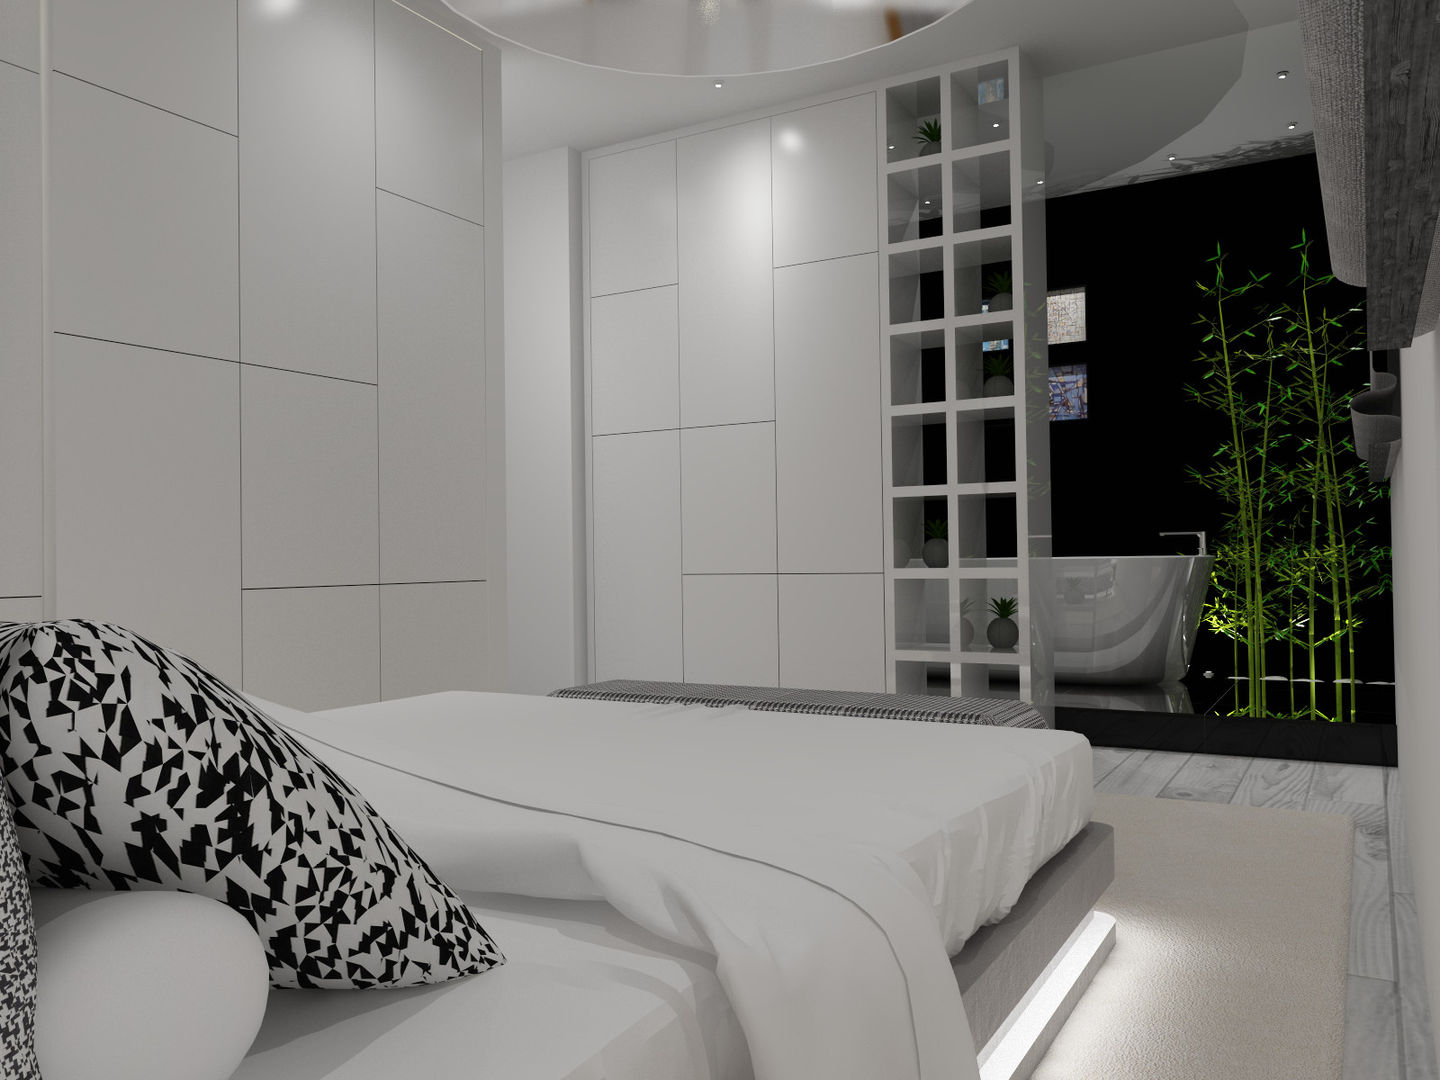 homify Chambre scandinave